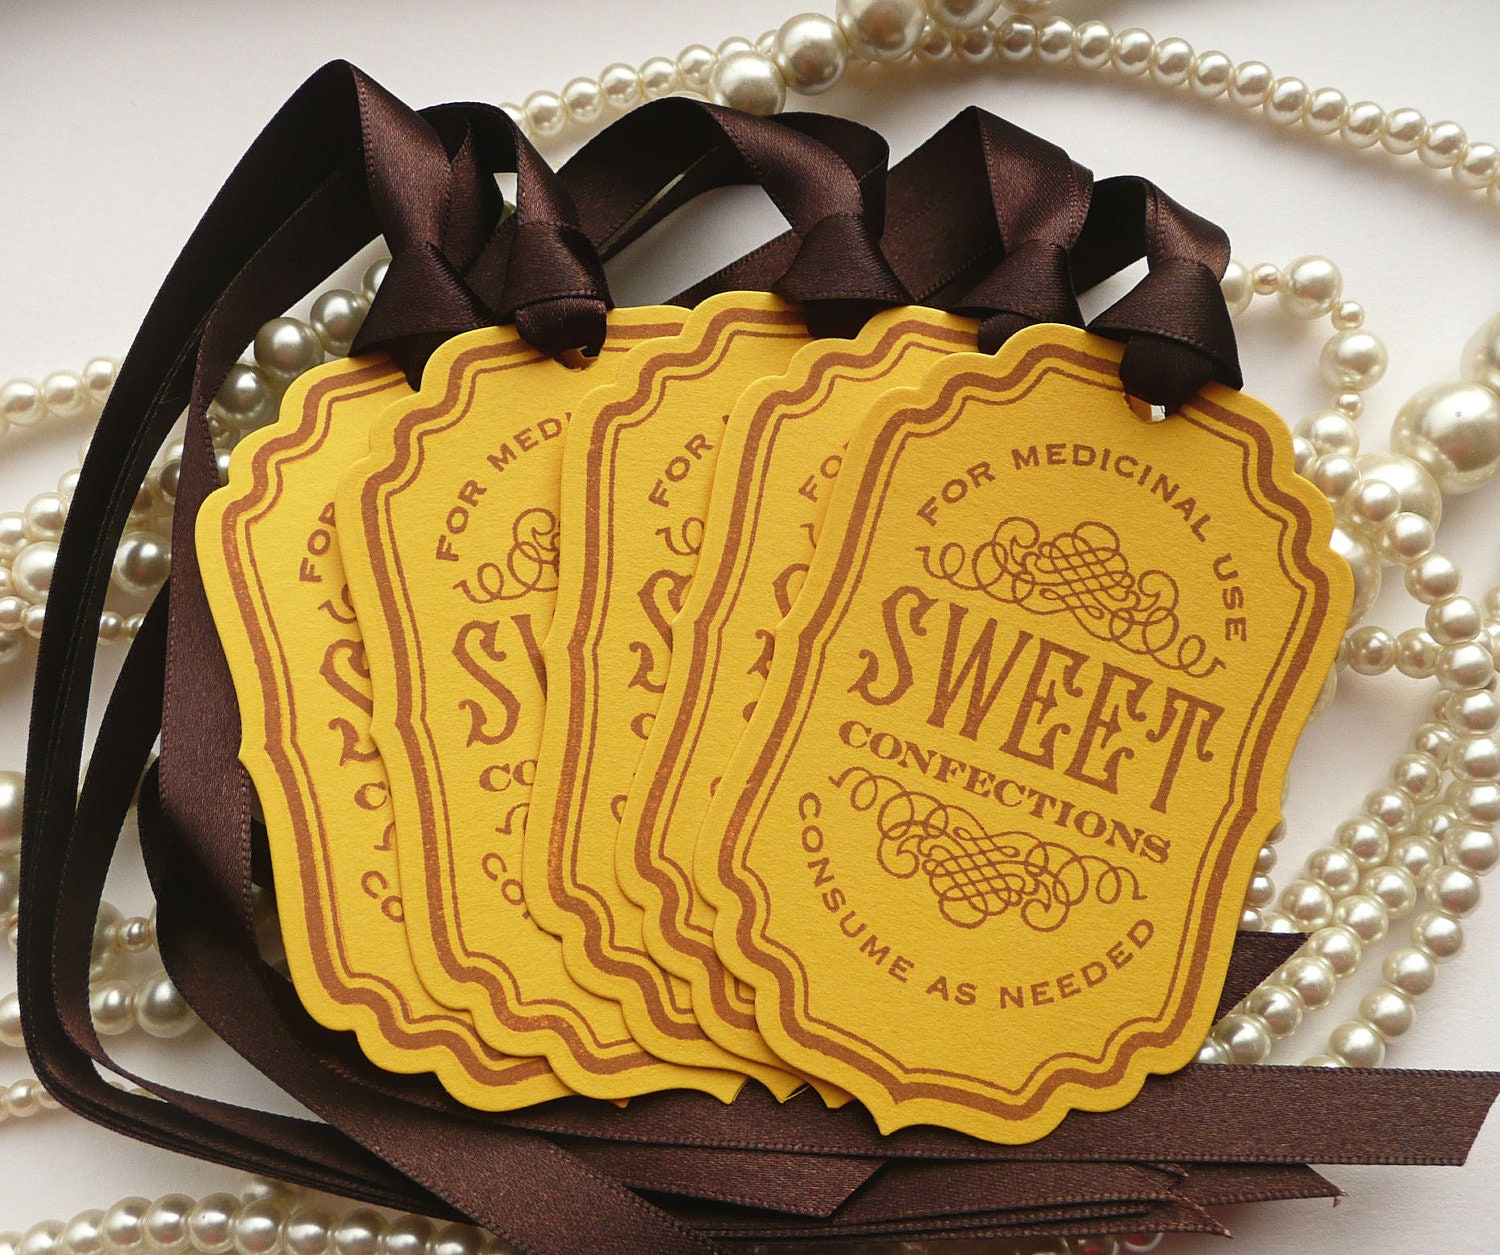 Bachelorette Party Candy Sweet Tags - Yellow and Brown - Buffet Table or Wedding Favor Tags, Party Tags SET of 5 - Code S11 - amaretto